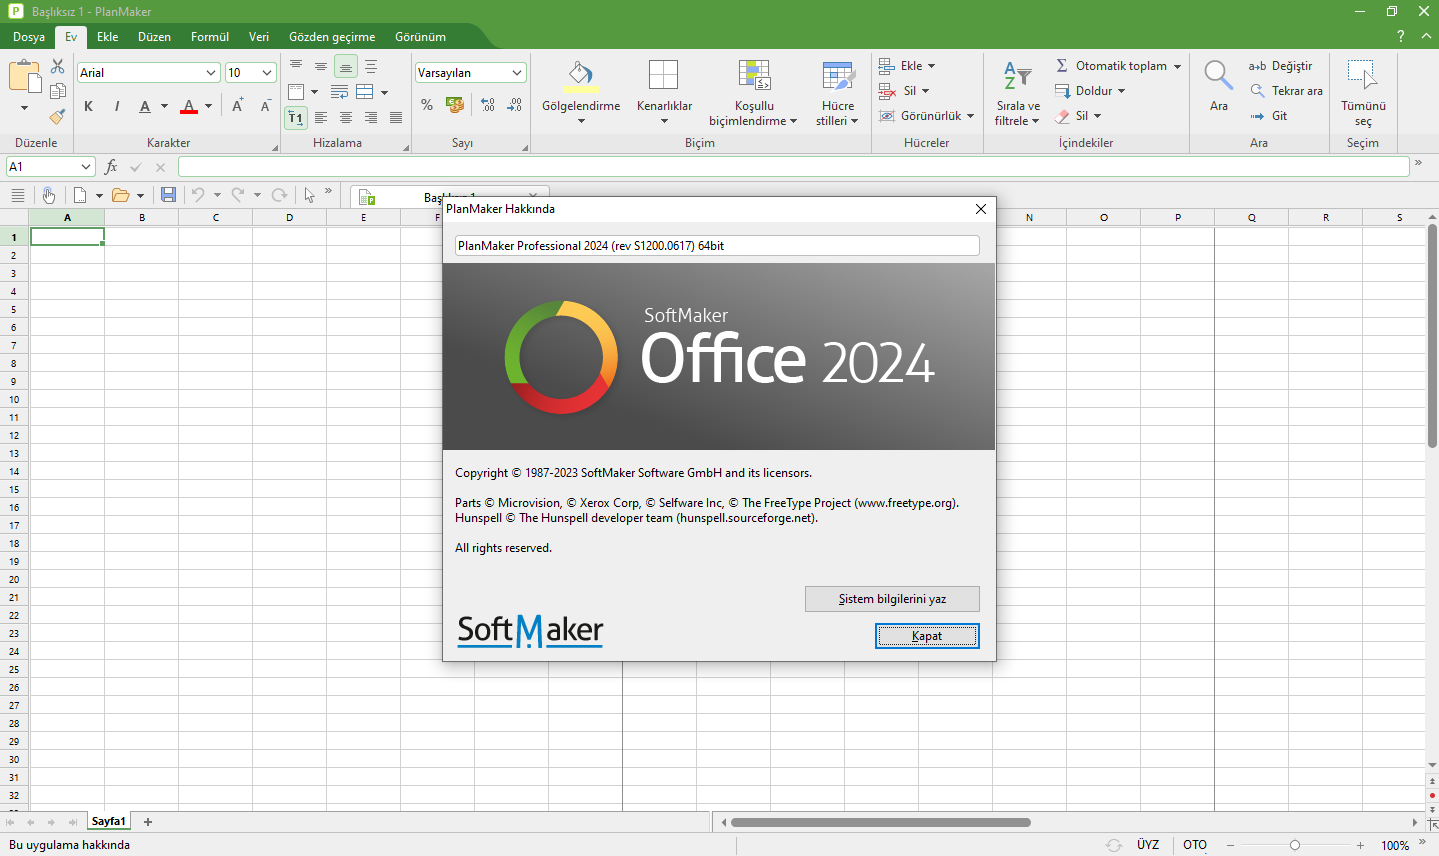 SoftMaker Office Professional 2024 rev.1204.0902 instal the new